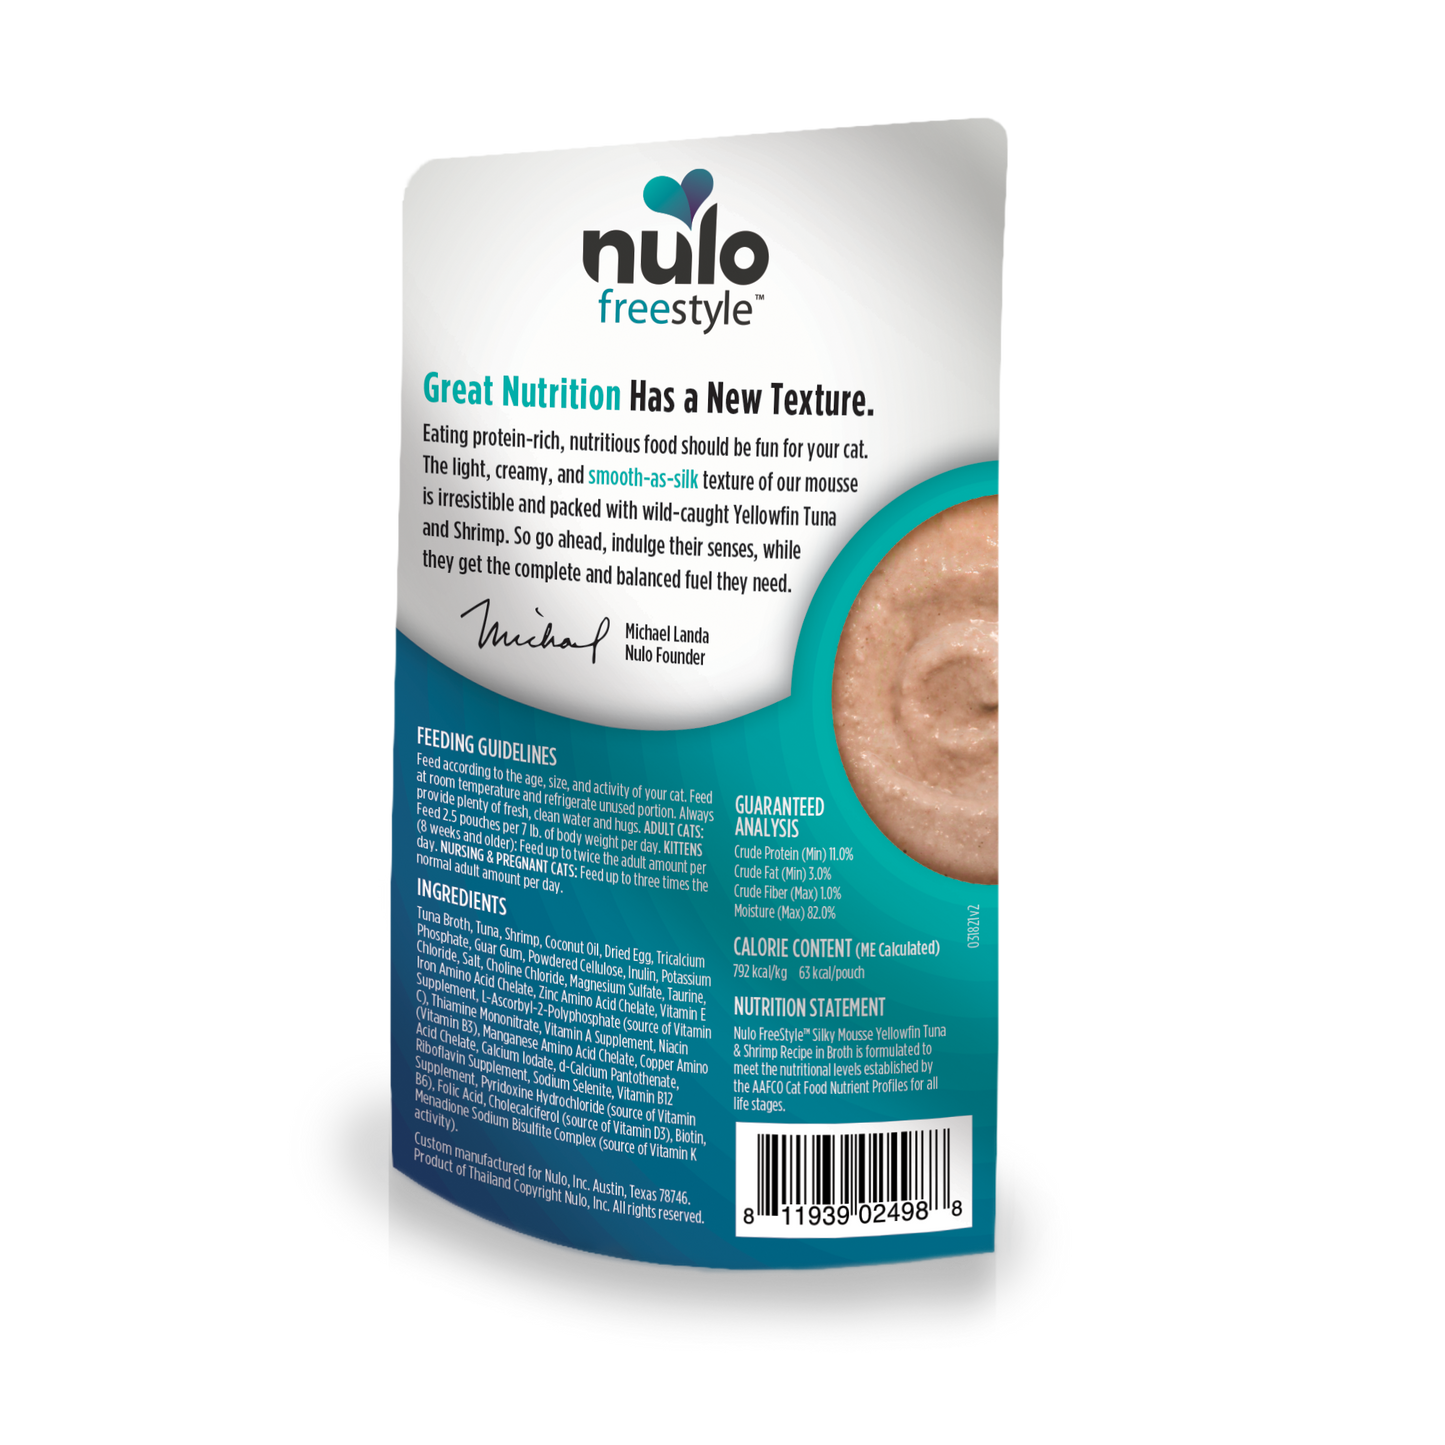 Nulo Freestyle Silky Mousse Tuna And Shrimp Recipe 2.8-oz, Wet Cat Food